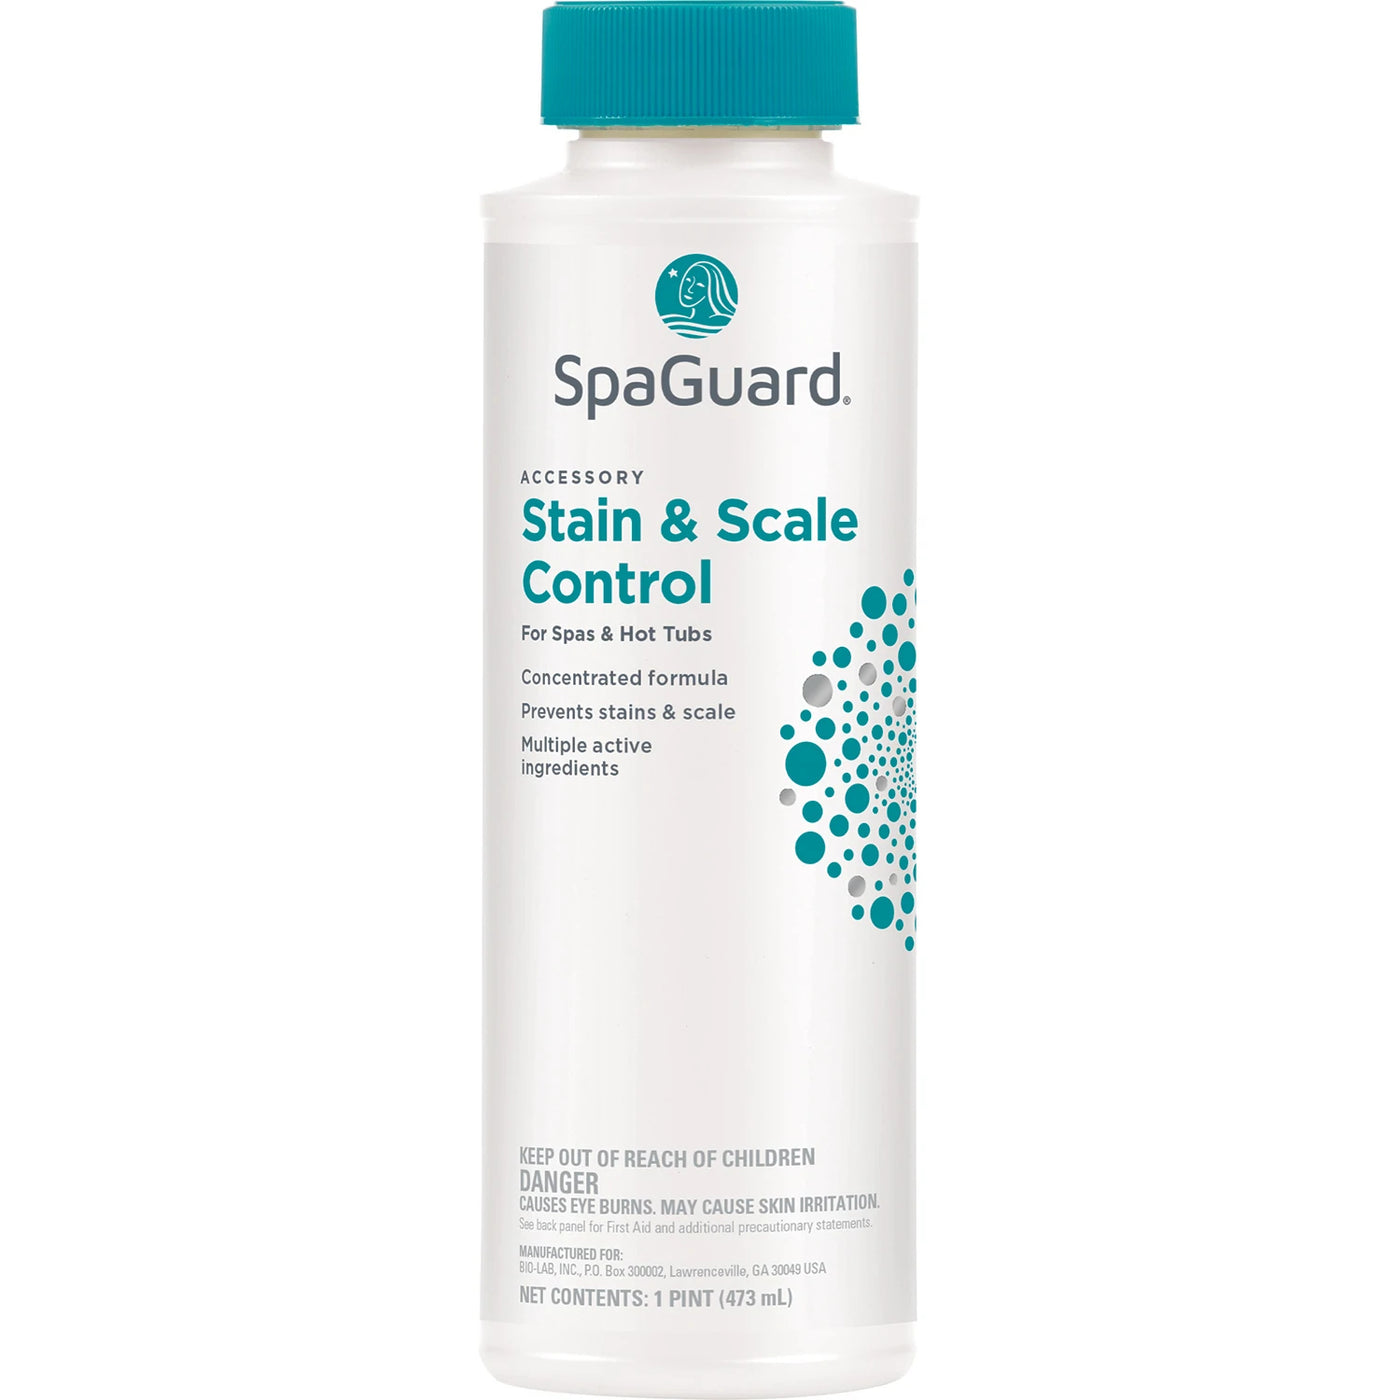 SpaGuard Stain & Scale Control (1pt)